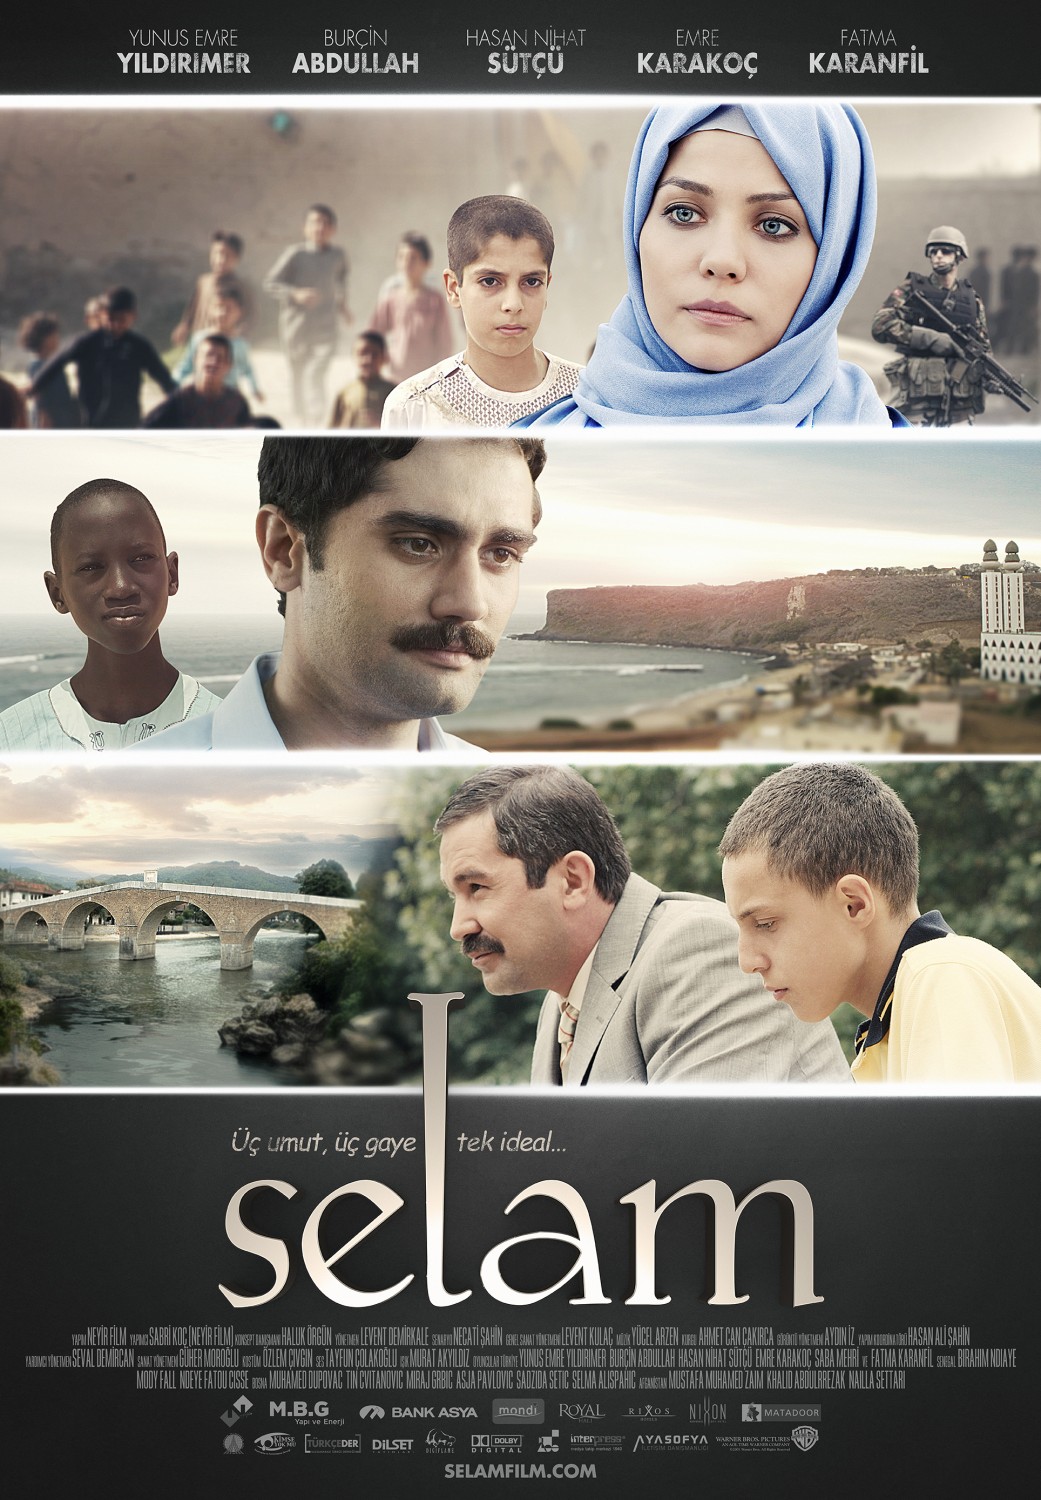 Extra Large Movie Poster Image for Selam 